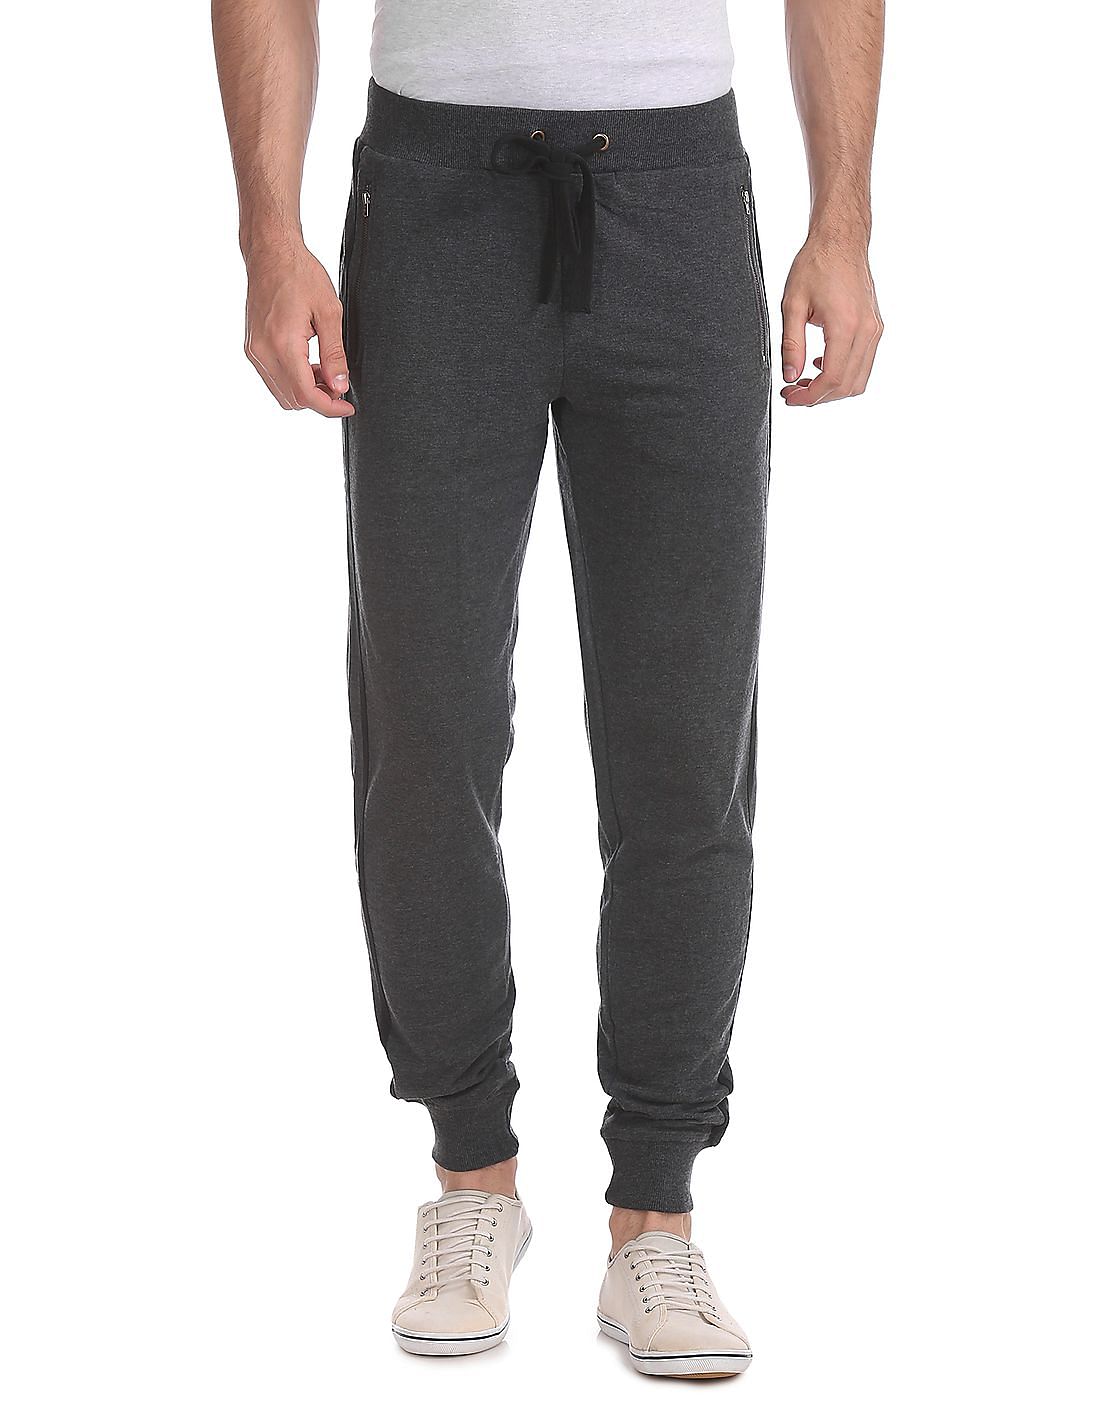 Buy Men Contrast Seam Heathered Joggers online at NNNOW.com